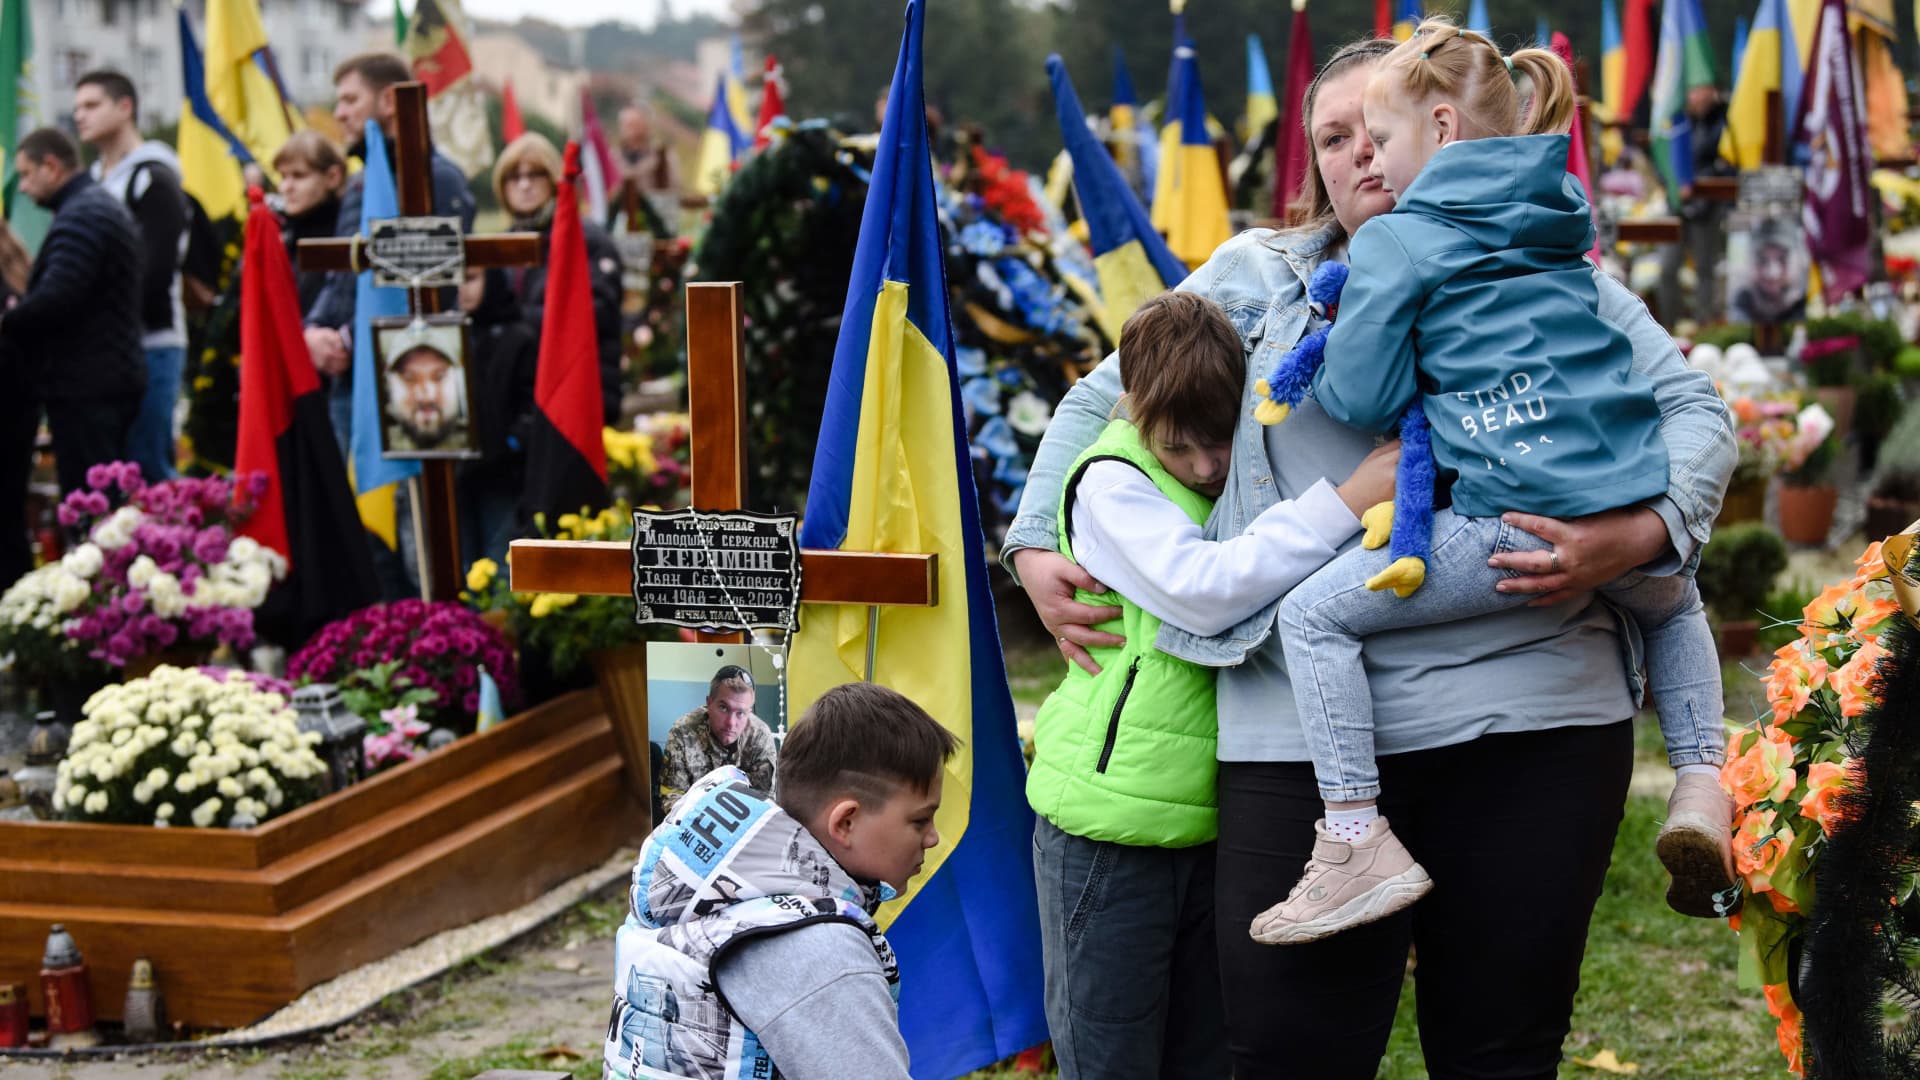 People react as they visit the graves of fallen Ukrainian soldiers at Lychakiv Cemetery in Lviv, to mark Ukraine's Defenders Day on October 14, 2022.